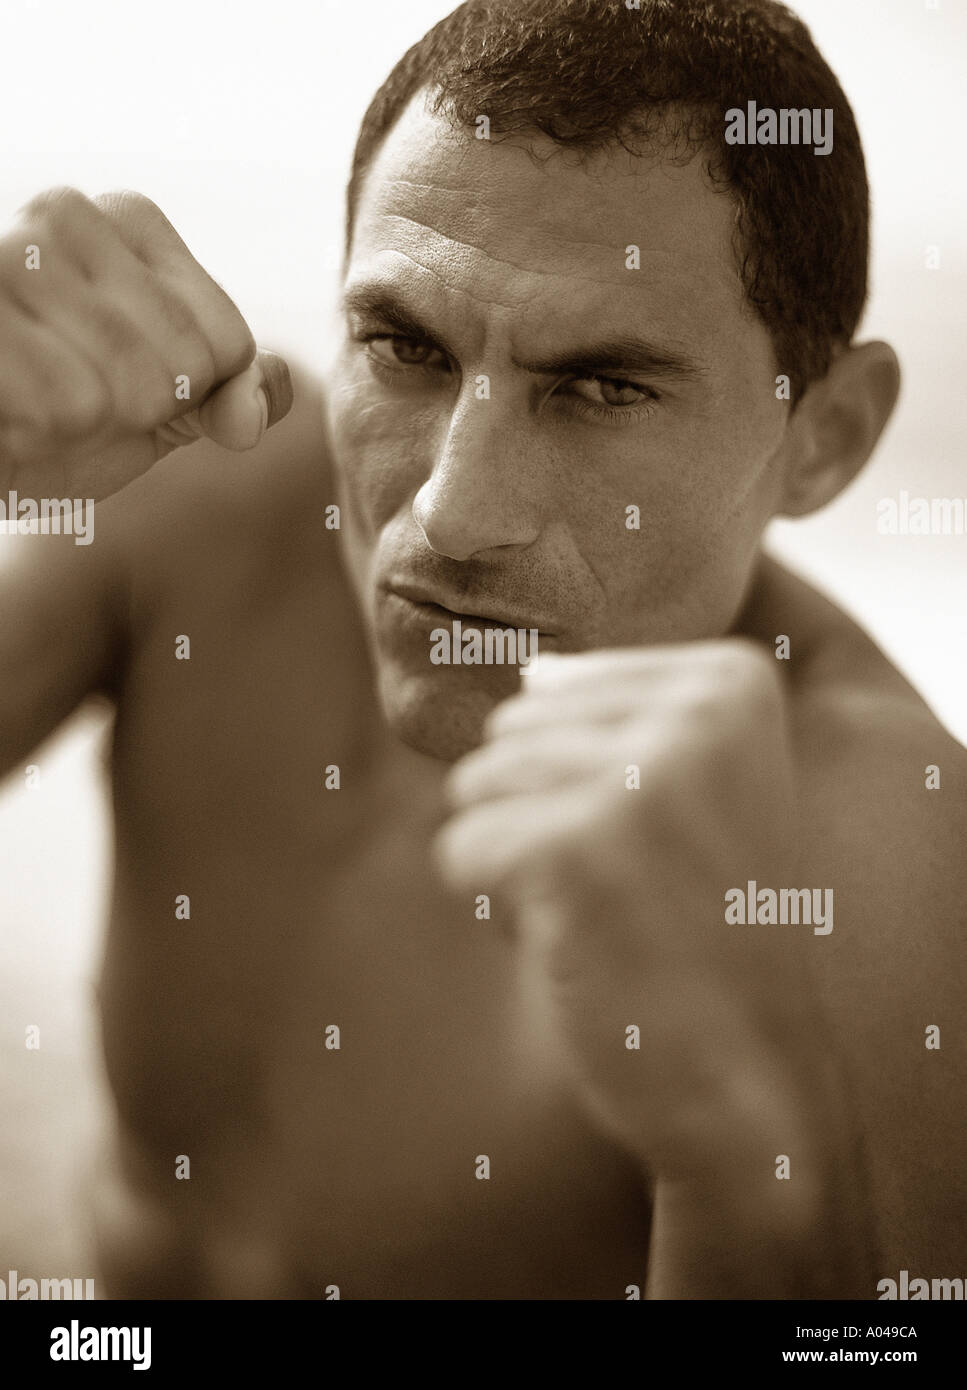 Portrait of male boxer with fists clenched ready to fight Stock Photo